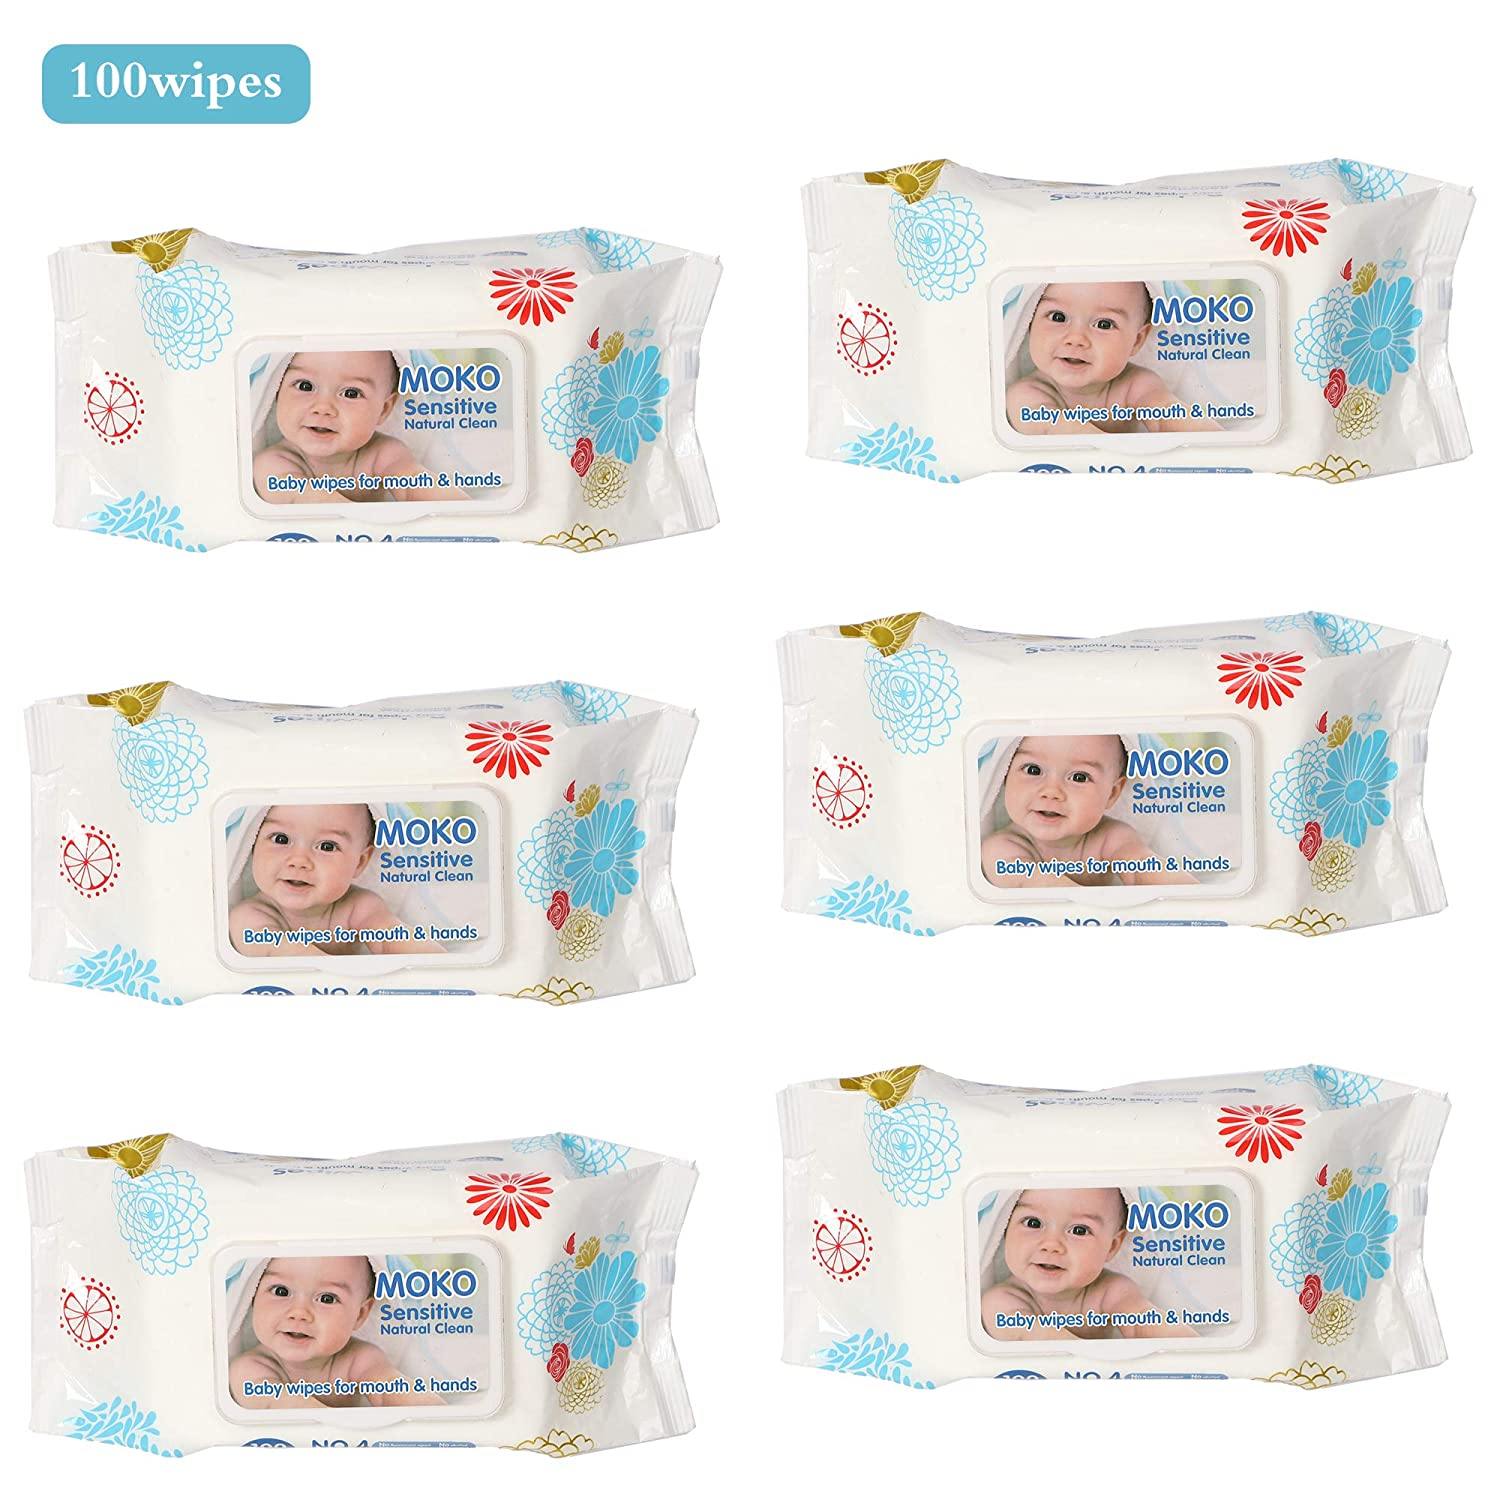 Baby Wipes Baby Wet Tissue Soft Cleaning Wipes Natural Wet Wipes, 6 Packs, 720 Wipes(1pc, 120 wipes) - Bosonshop